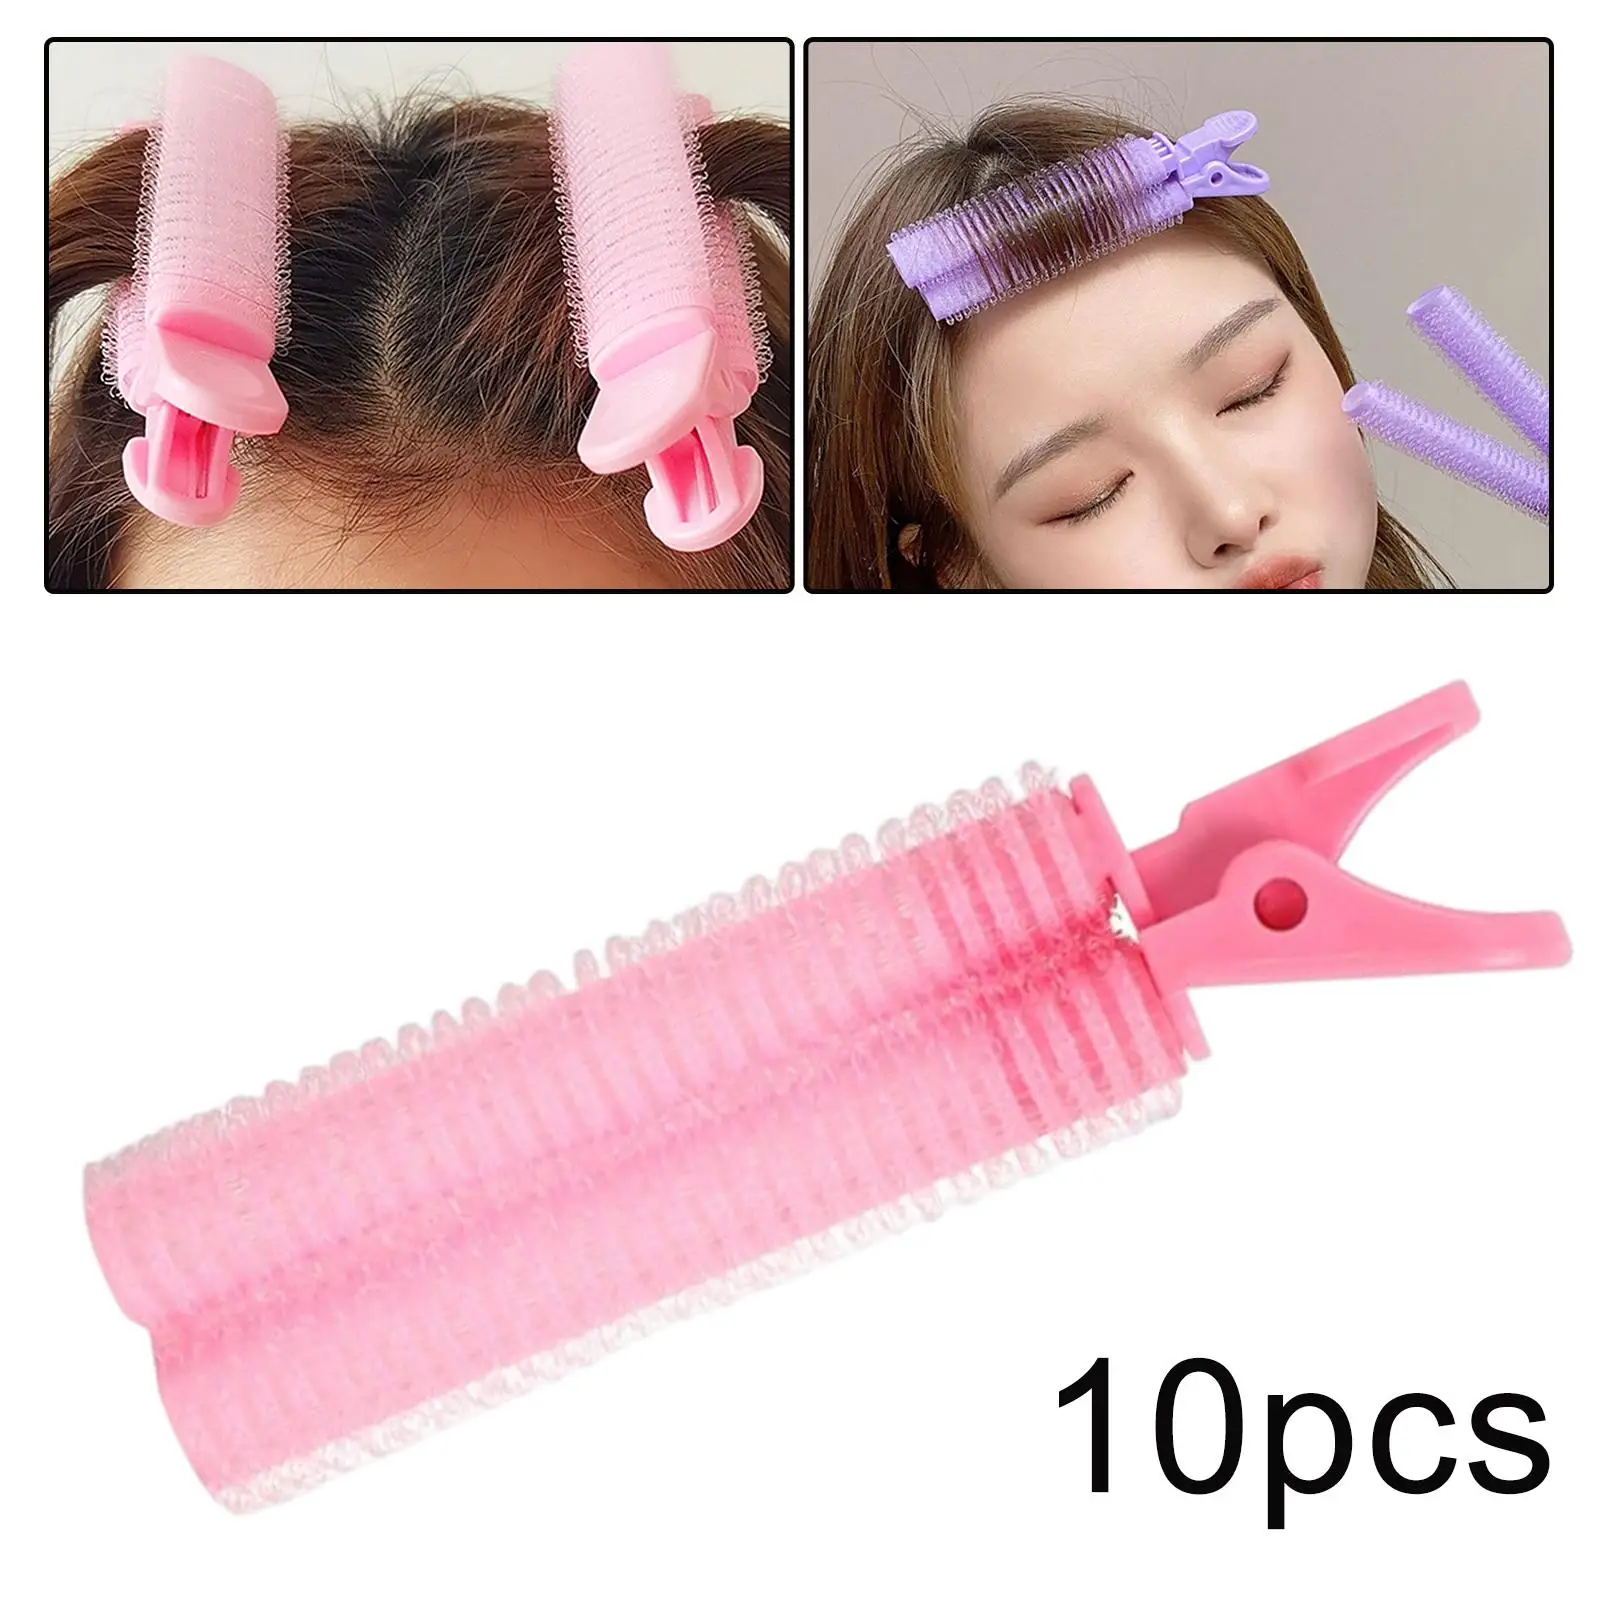 10 Pieces Hair Bangs Curling Clips Washable Durable Hair Top Barrel Reusable Hair Bangs Roller for DIY Hair Styling Girls